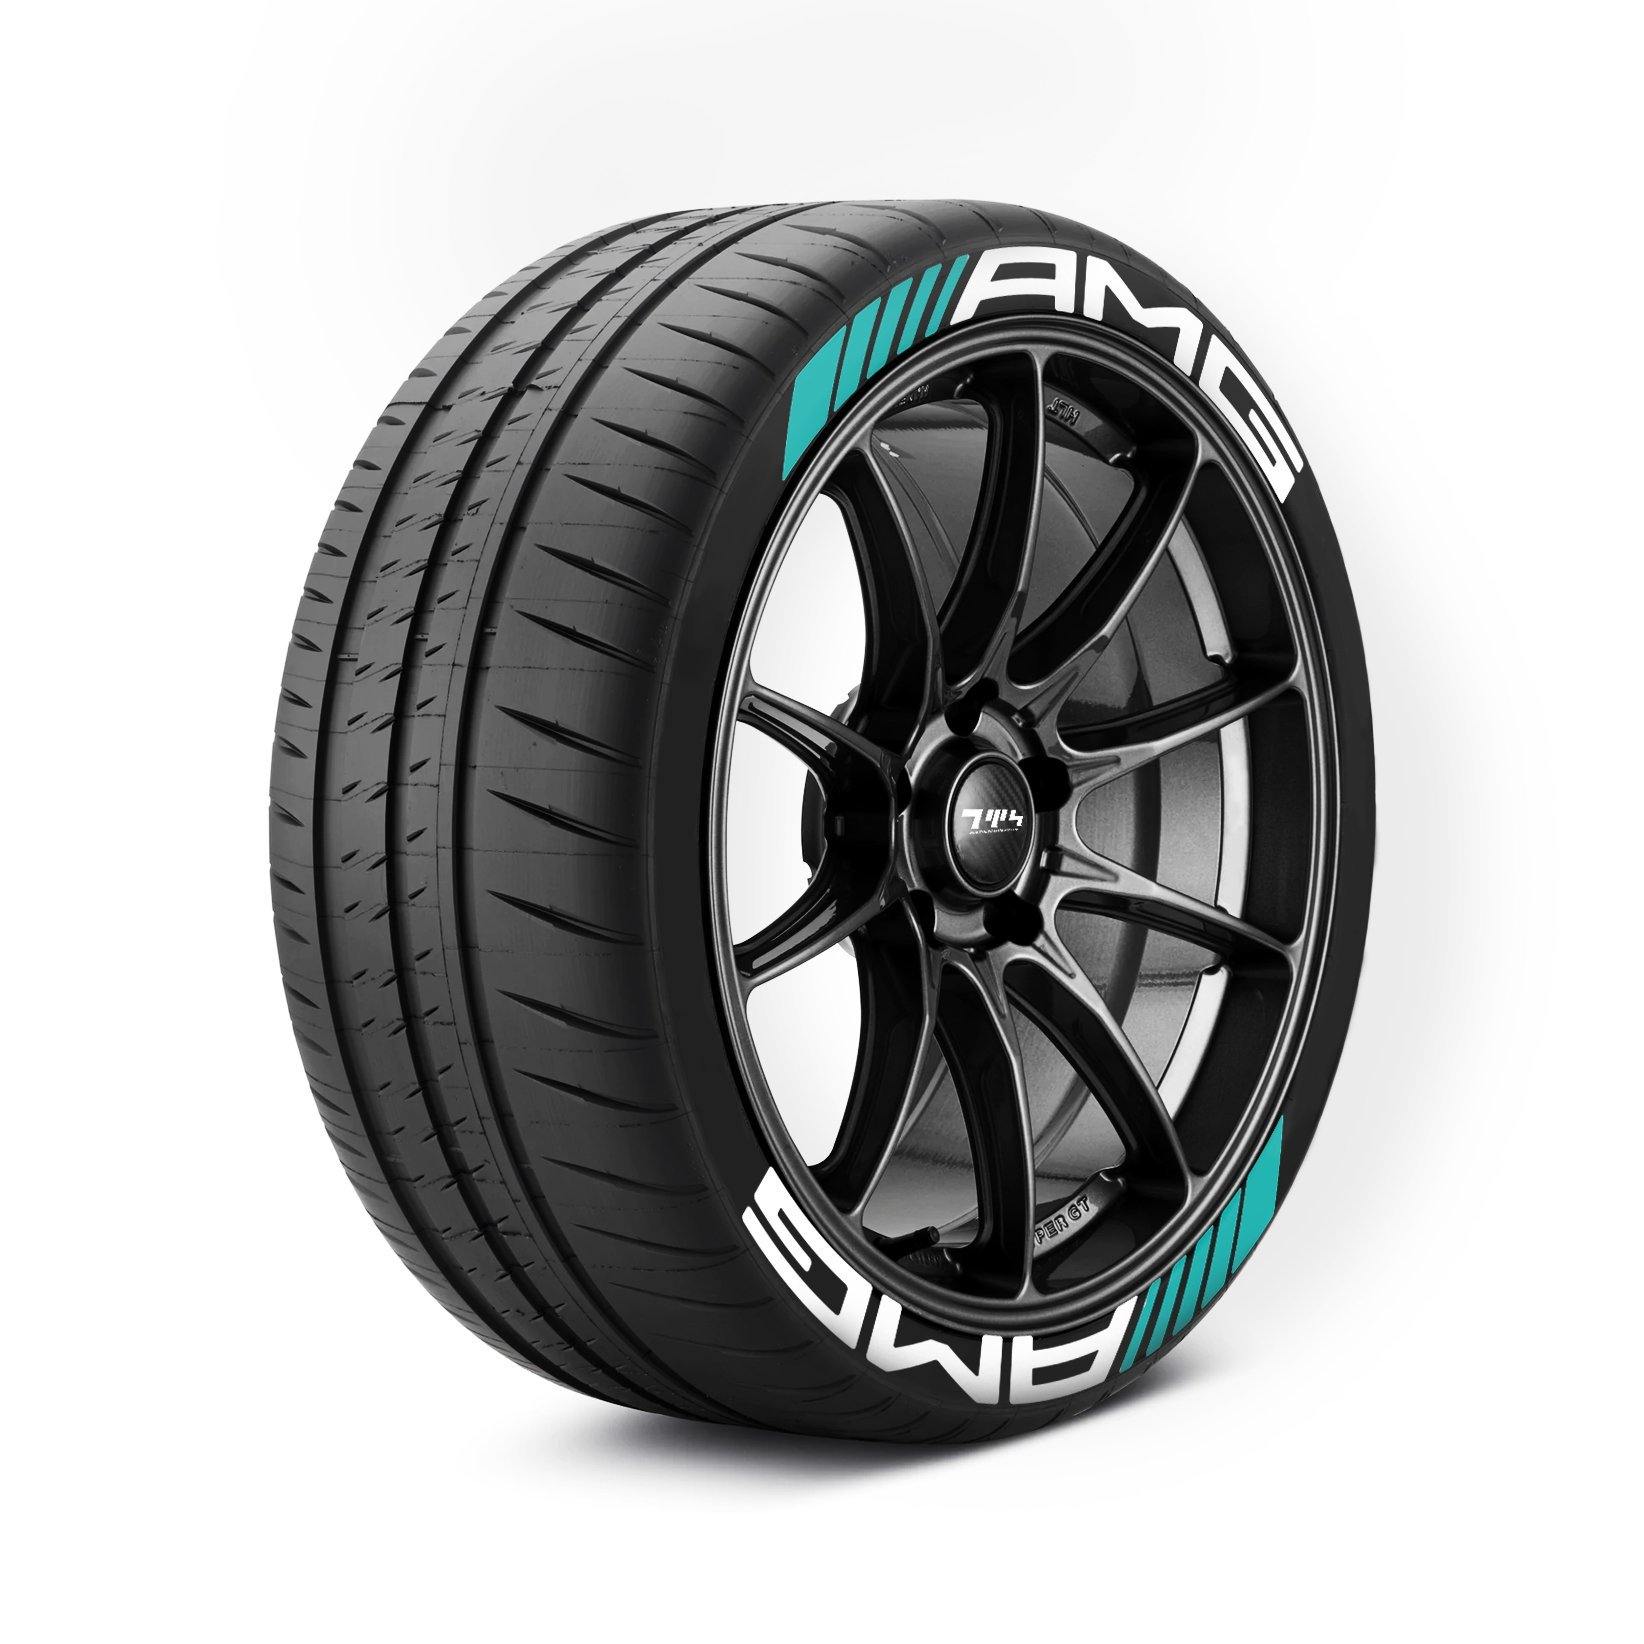 AMG Tyre Stickers - Tyre Wall Stickers